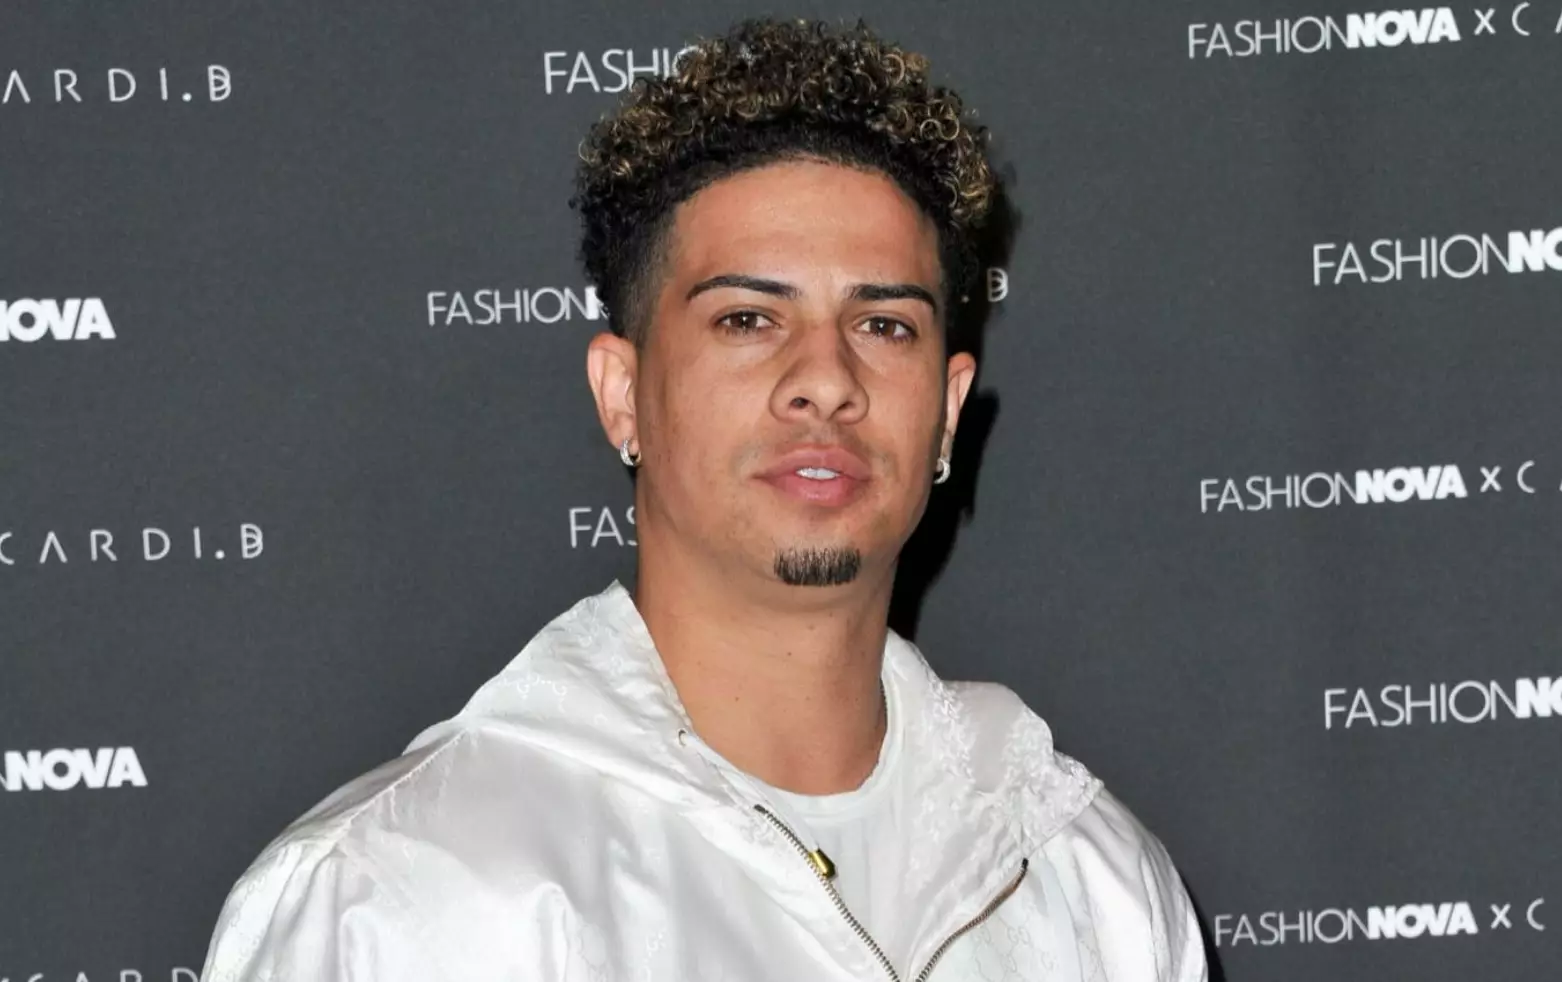 Who Is Austin McBroom, What Is His Height And How Much Is He Worth?